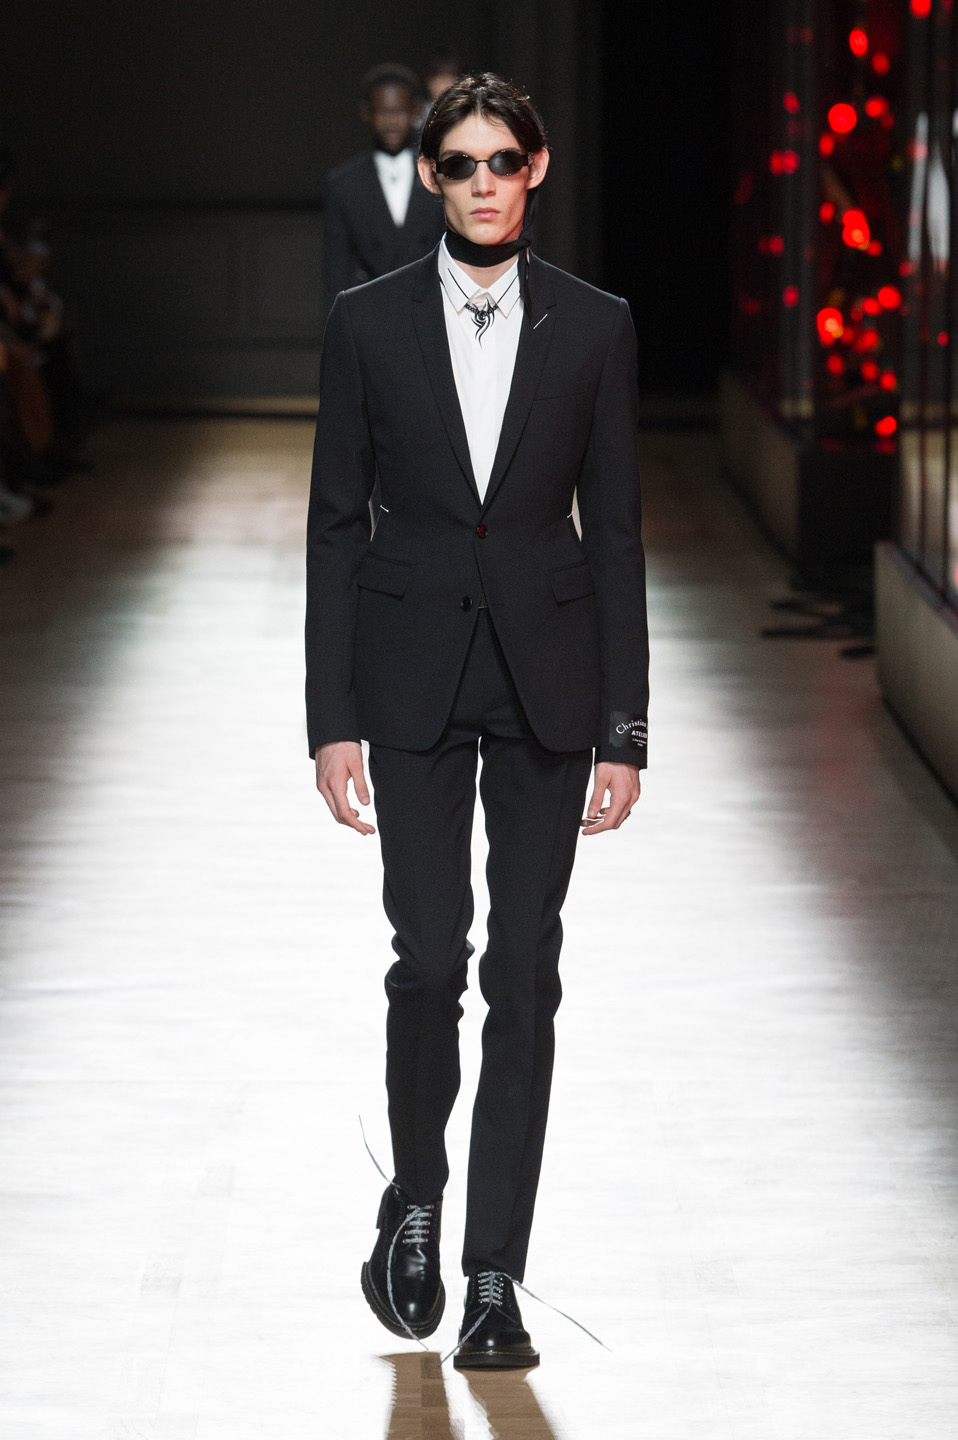 DIOR HOMME WINTER 18 19 BY PATRICE STABLE look05 Fall/WInter 2018 runway